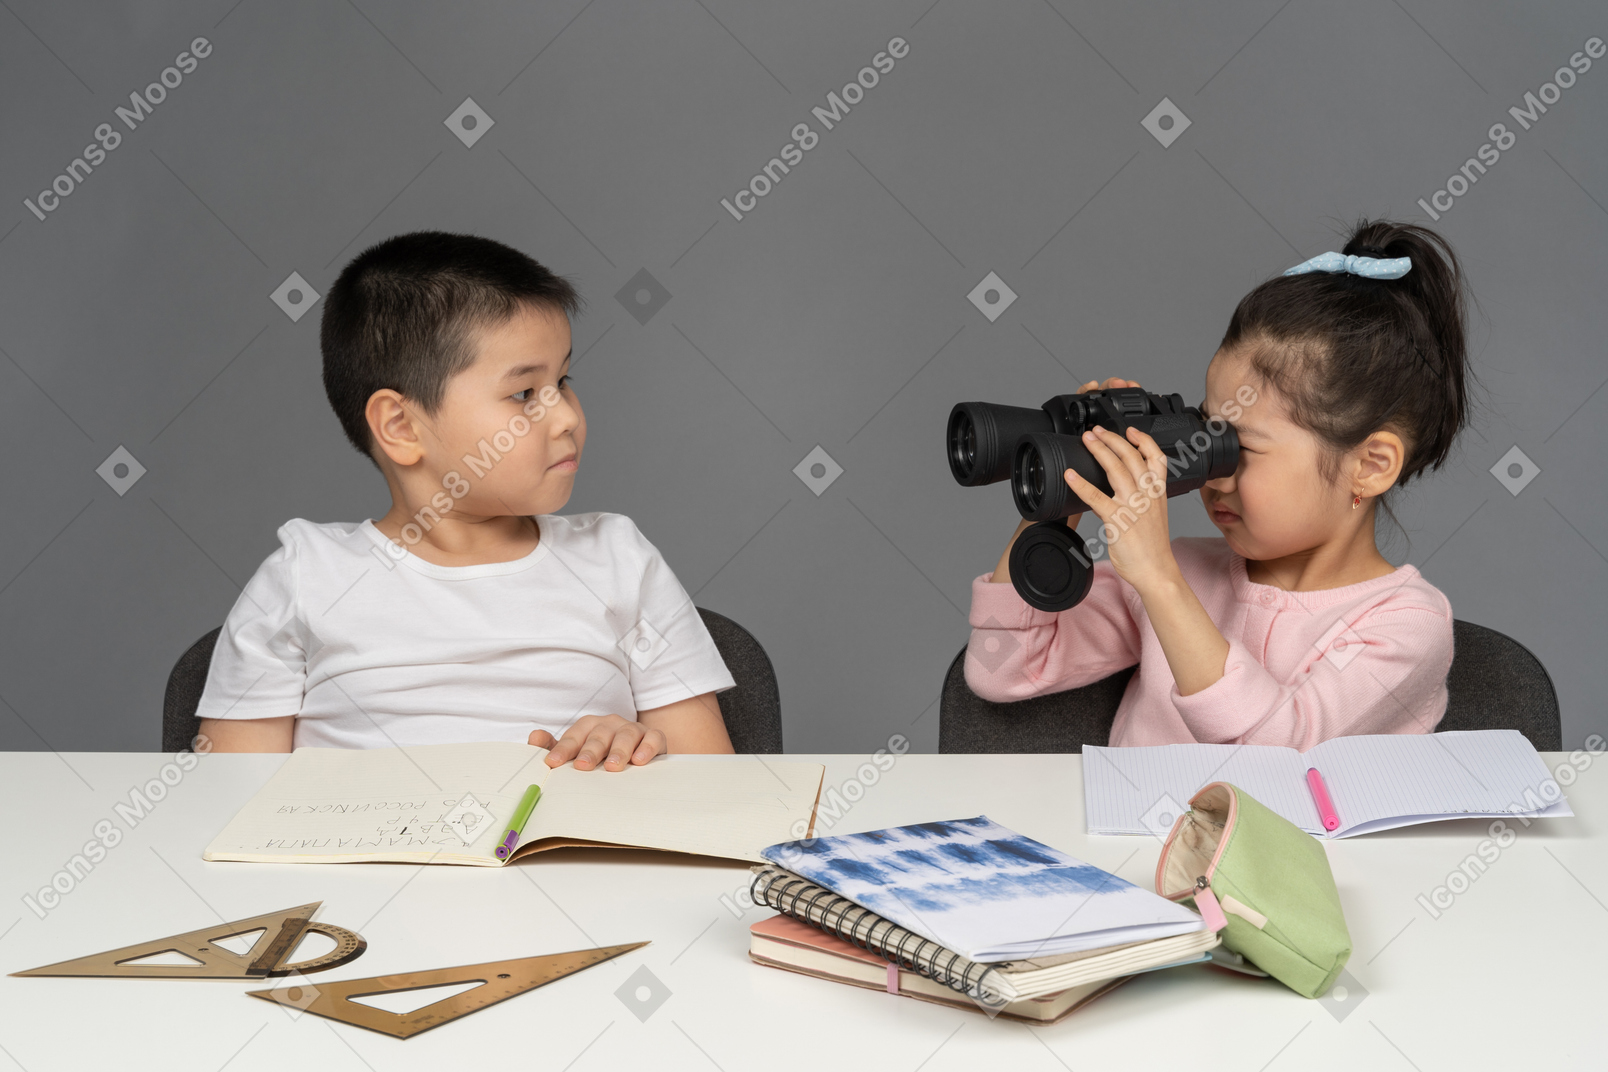 Little girl looking at her brother through binoculars